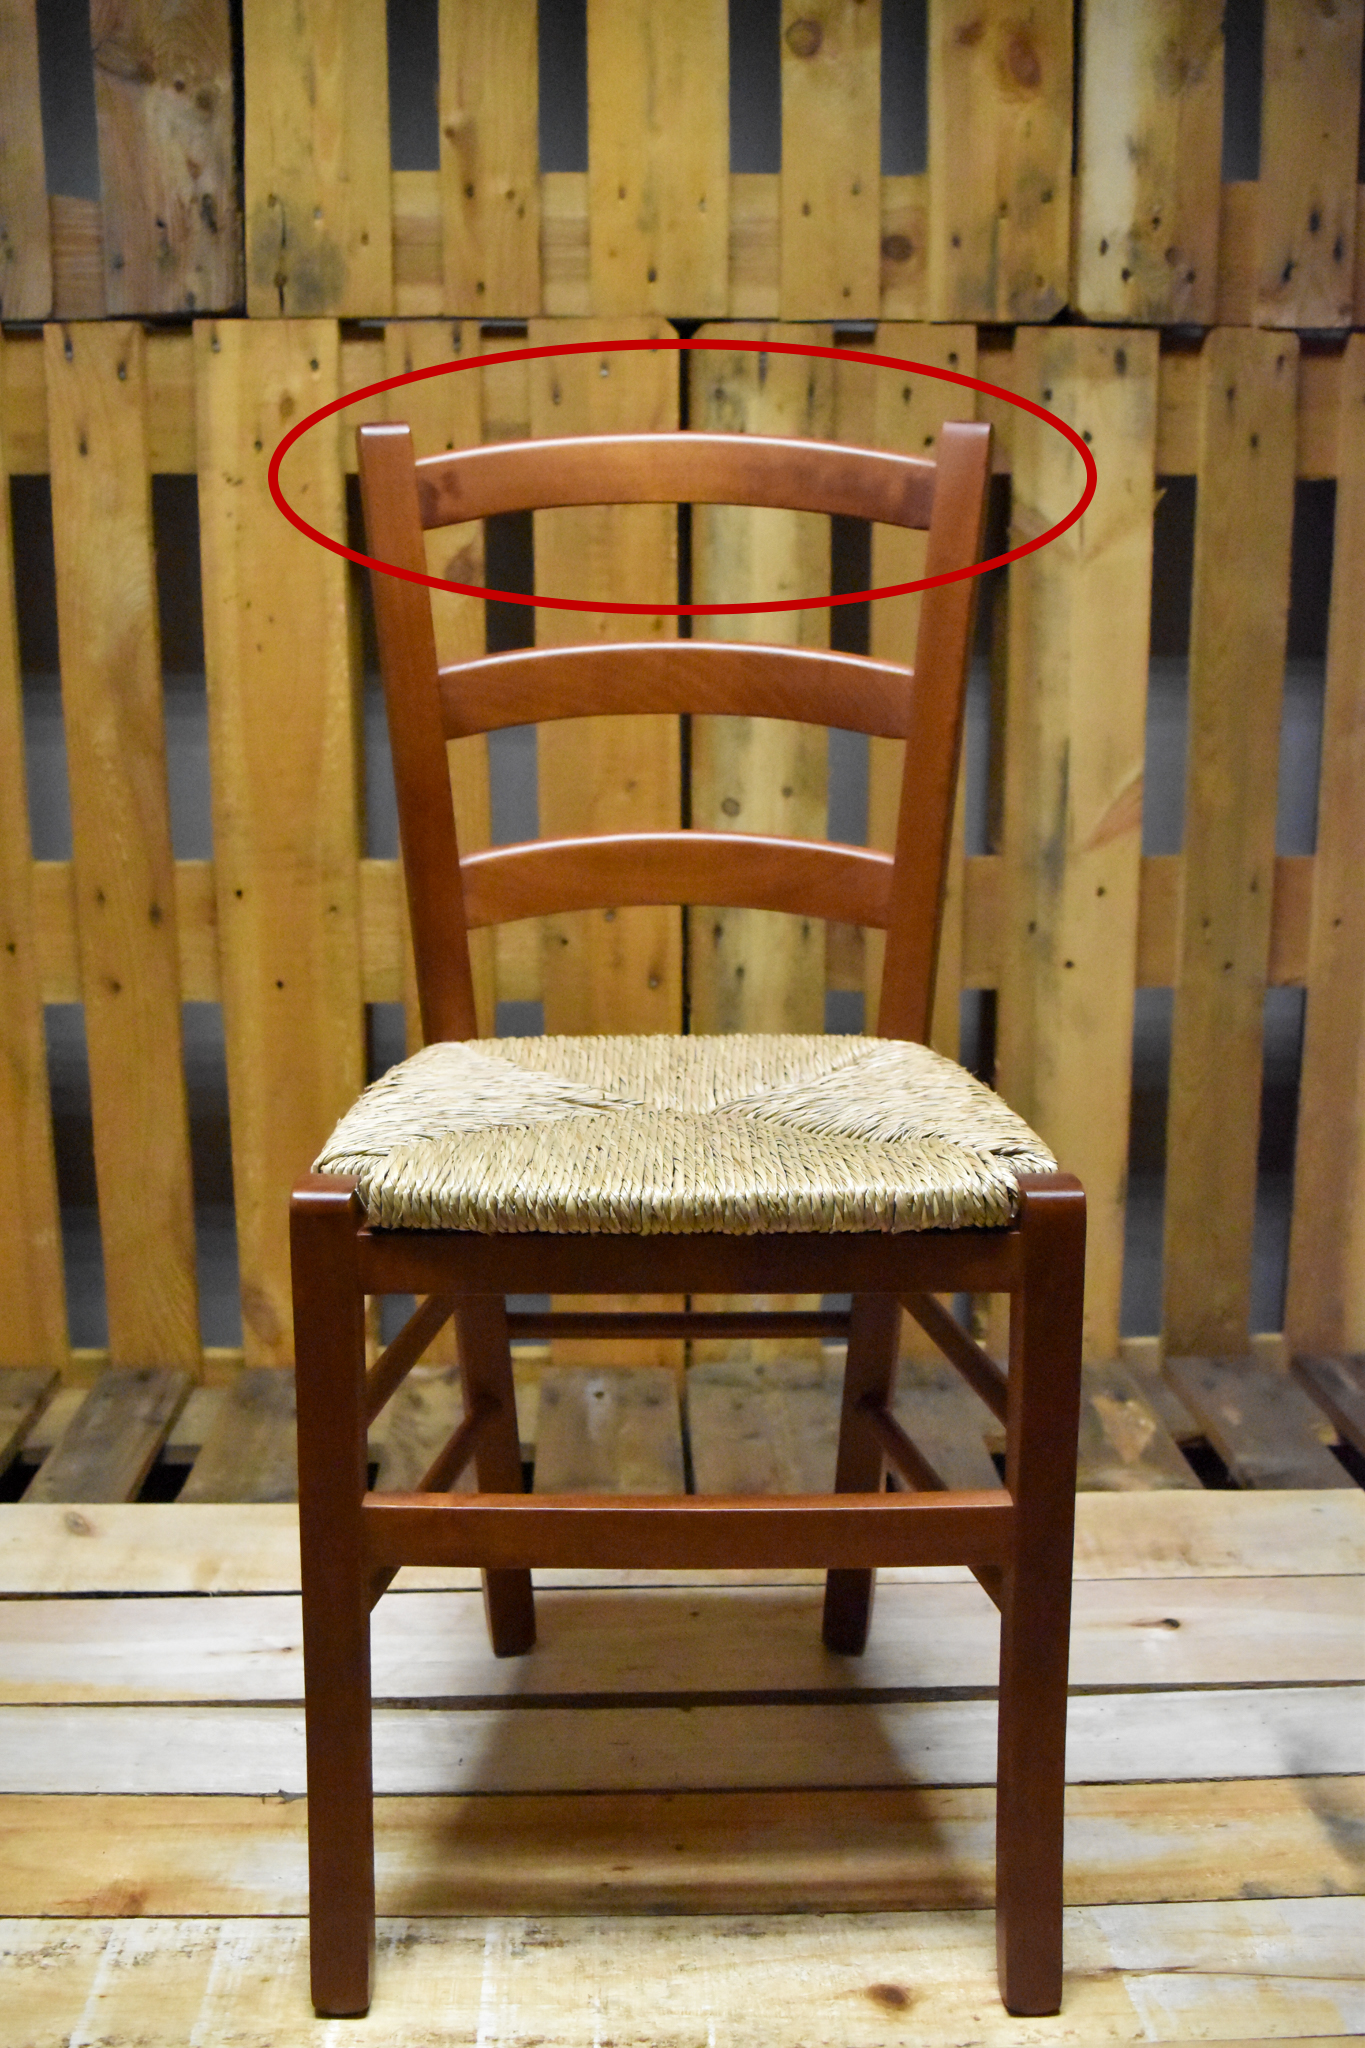 Stock chairs model 14 walnut color straw seat